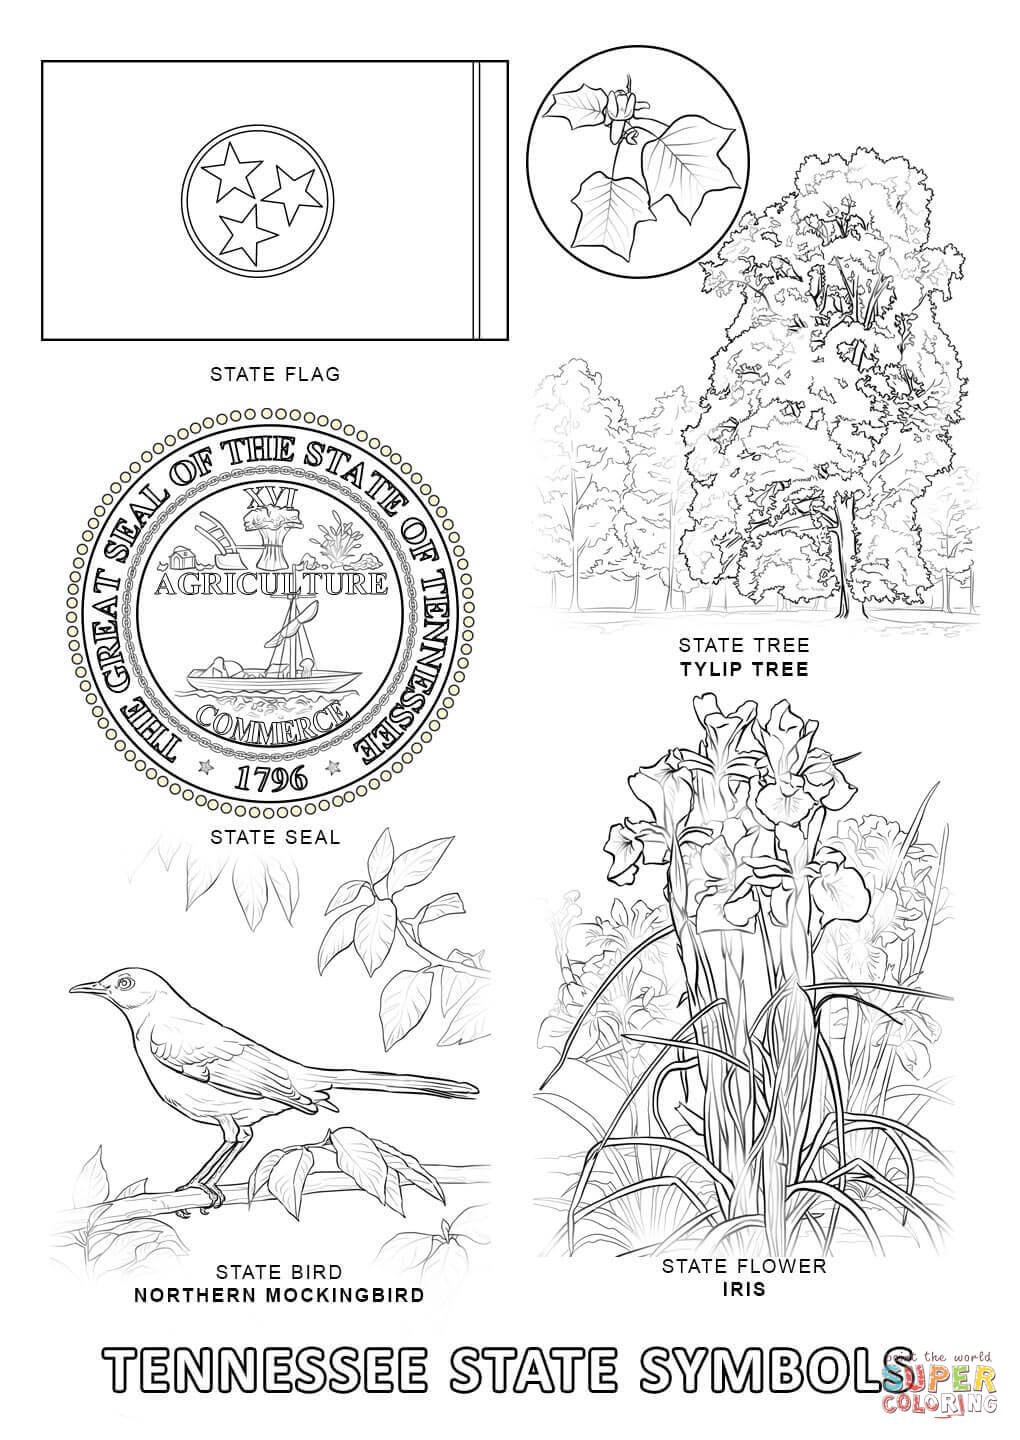 Tennessee State Symbols coloring page | Free Printable Coloring Pages